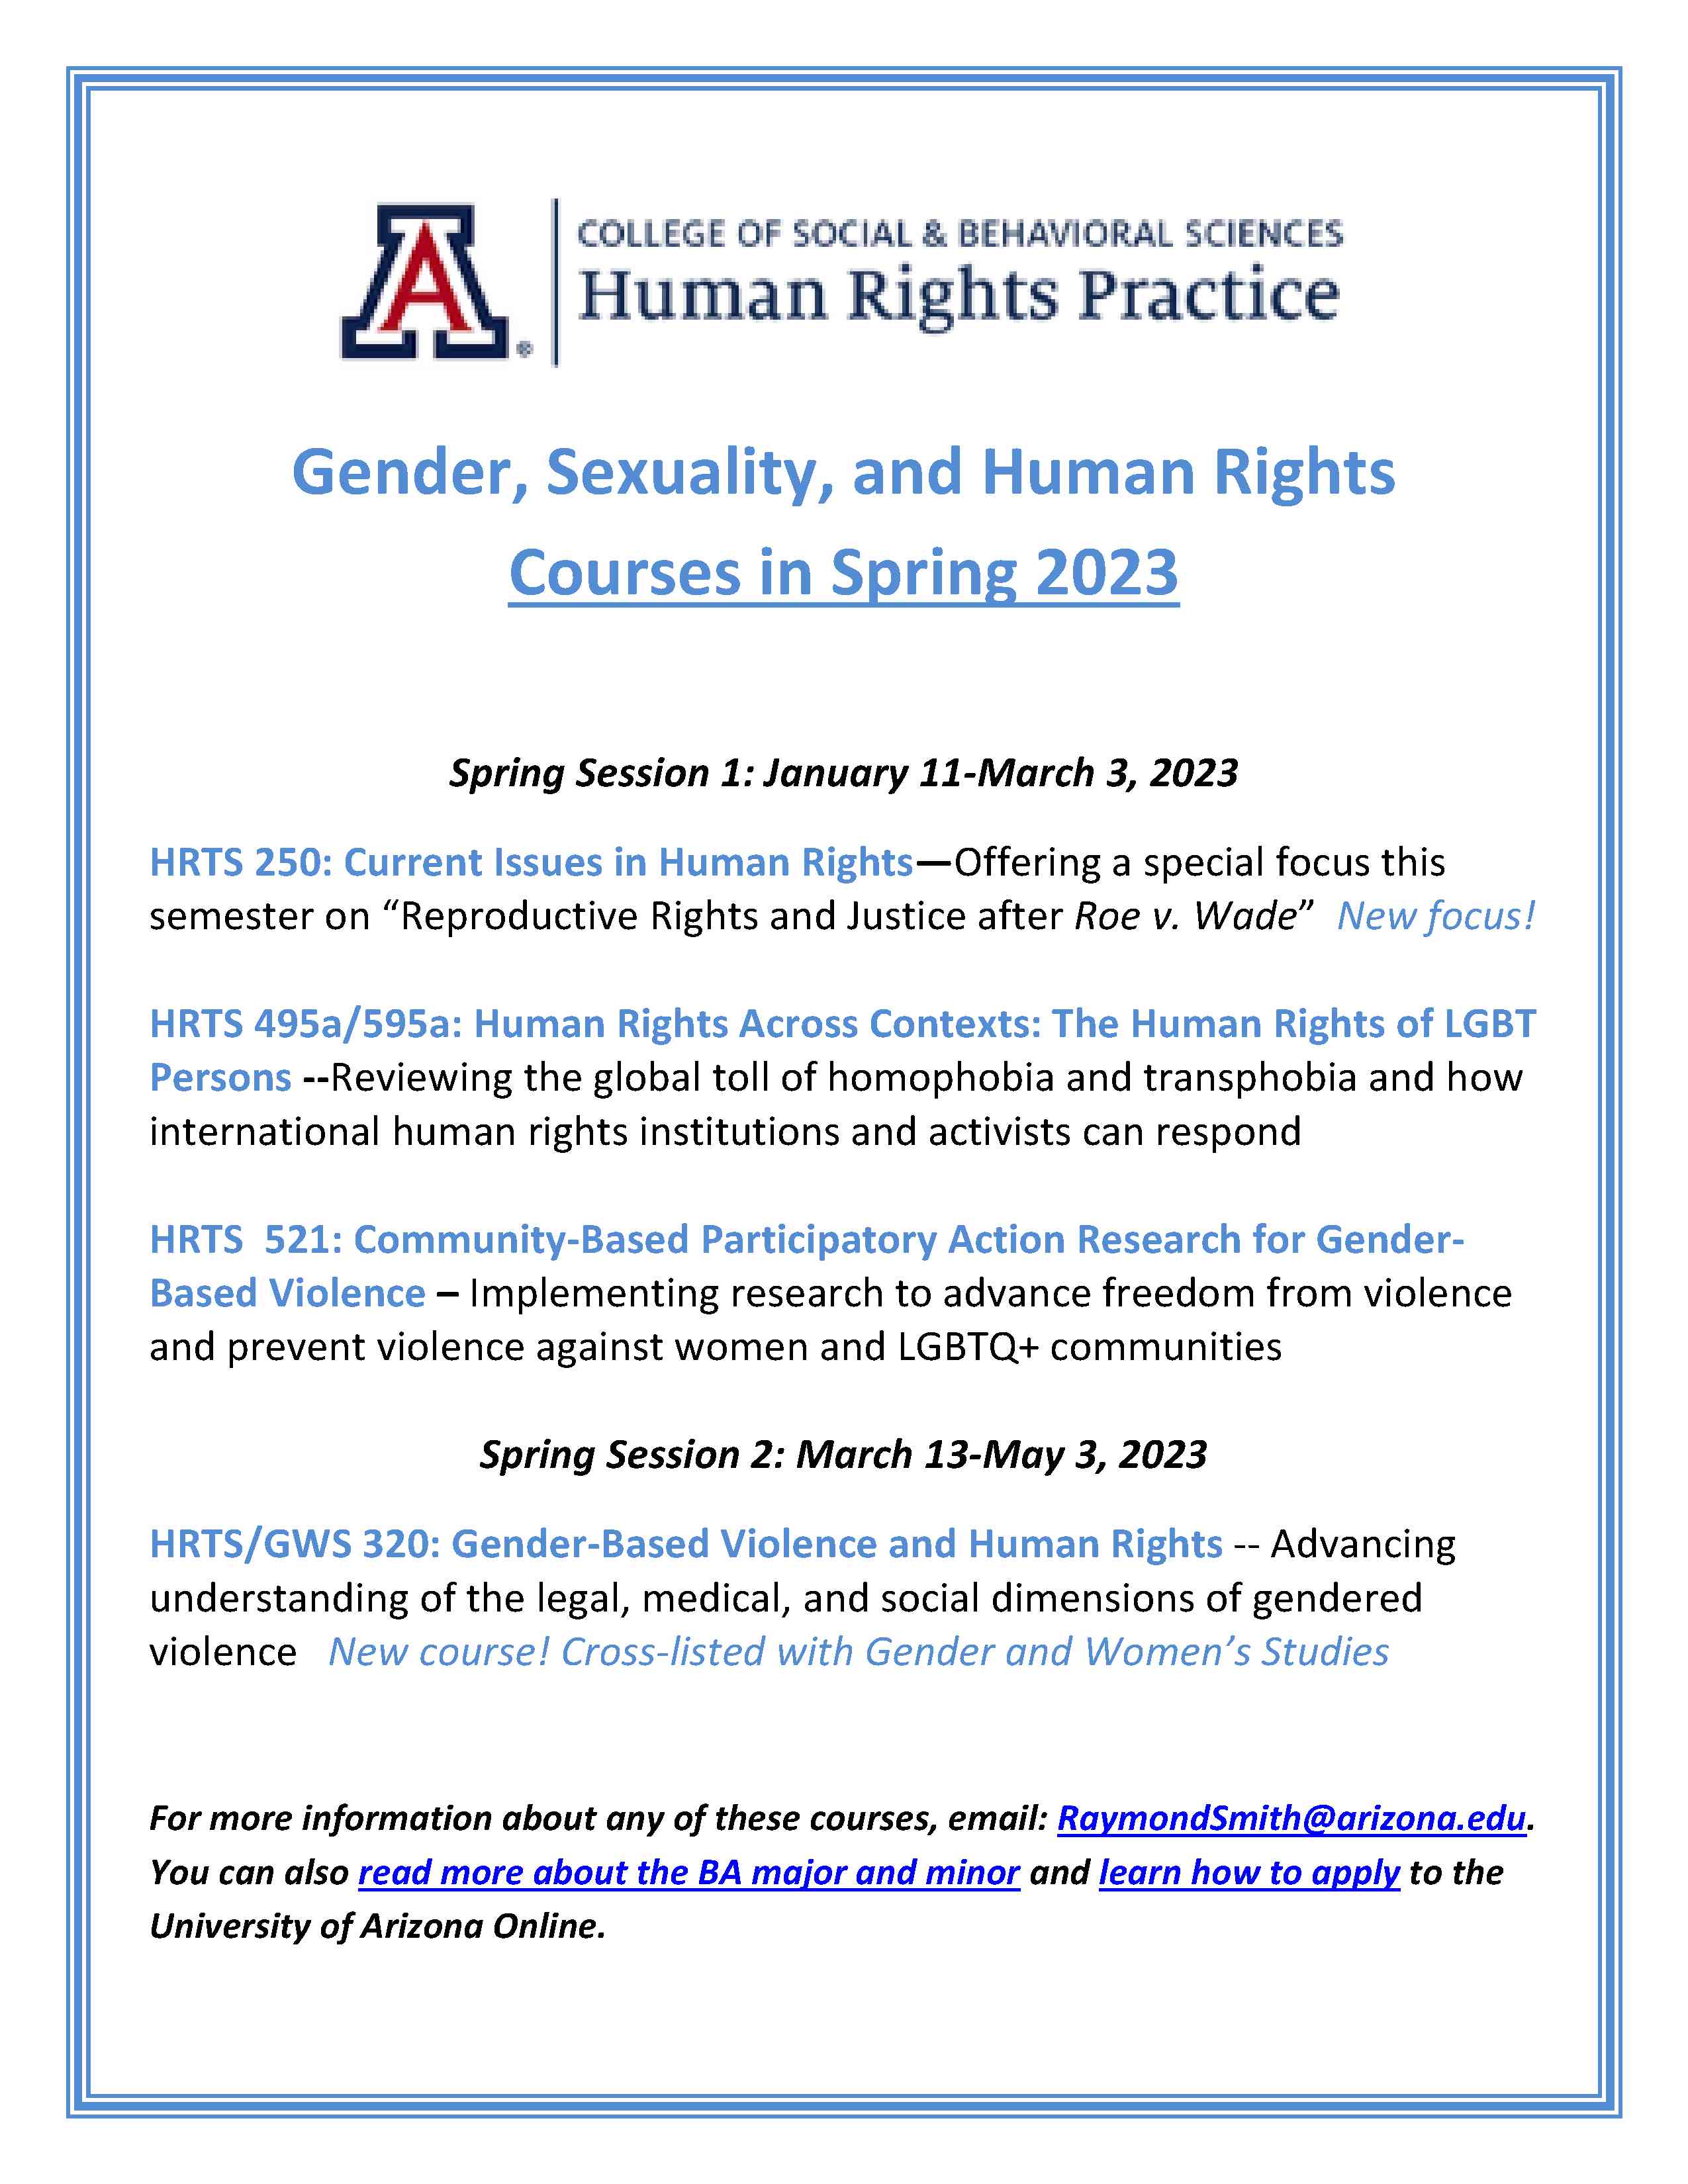 Spring 2023 -- Human Rights Practice gender and sexuality courses